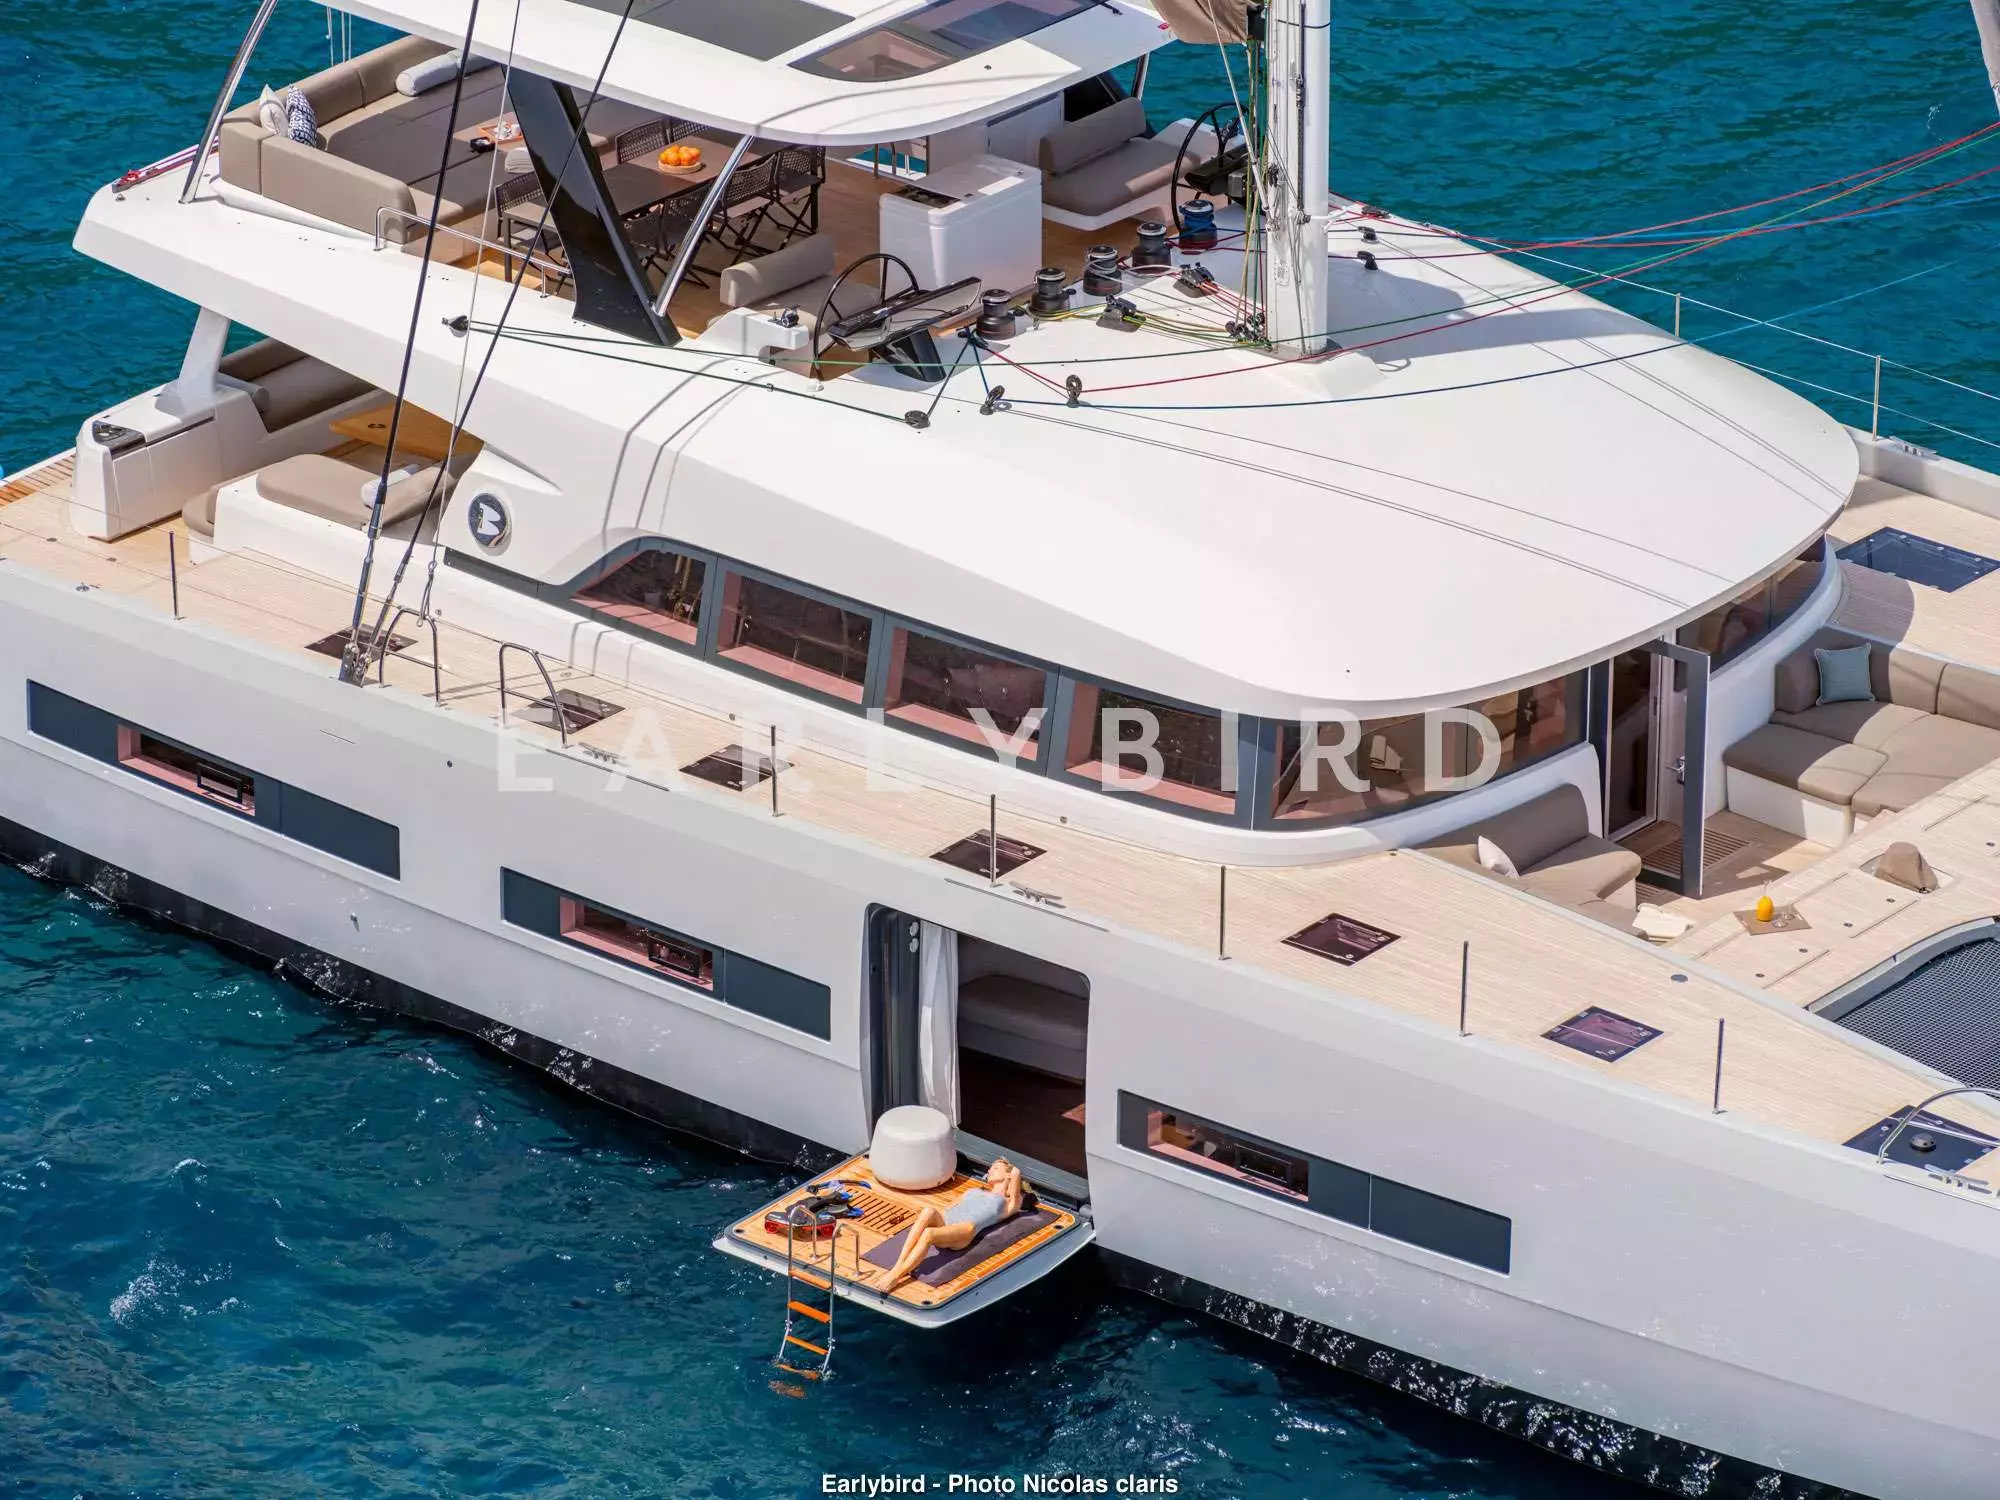 Earlybird by Lagoon - Top rates for a Charter of a private Luxury Catamaran in France